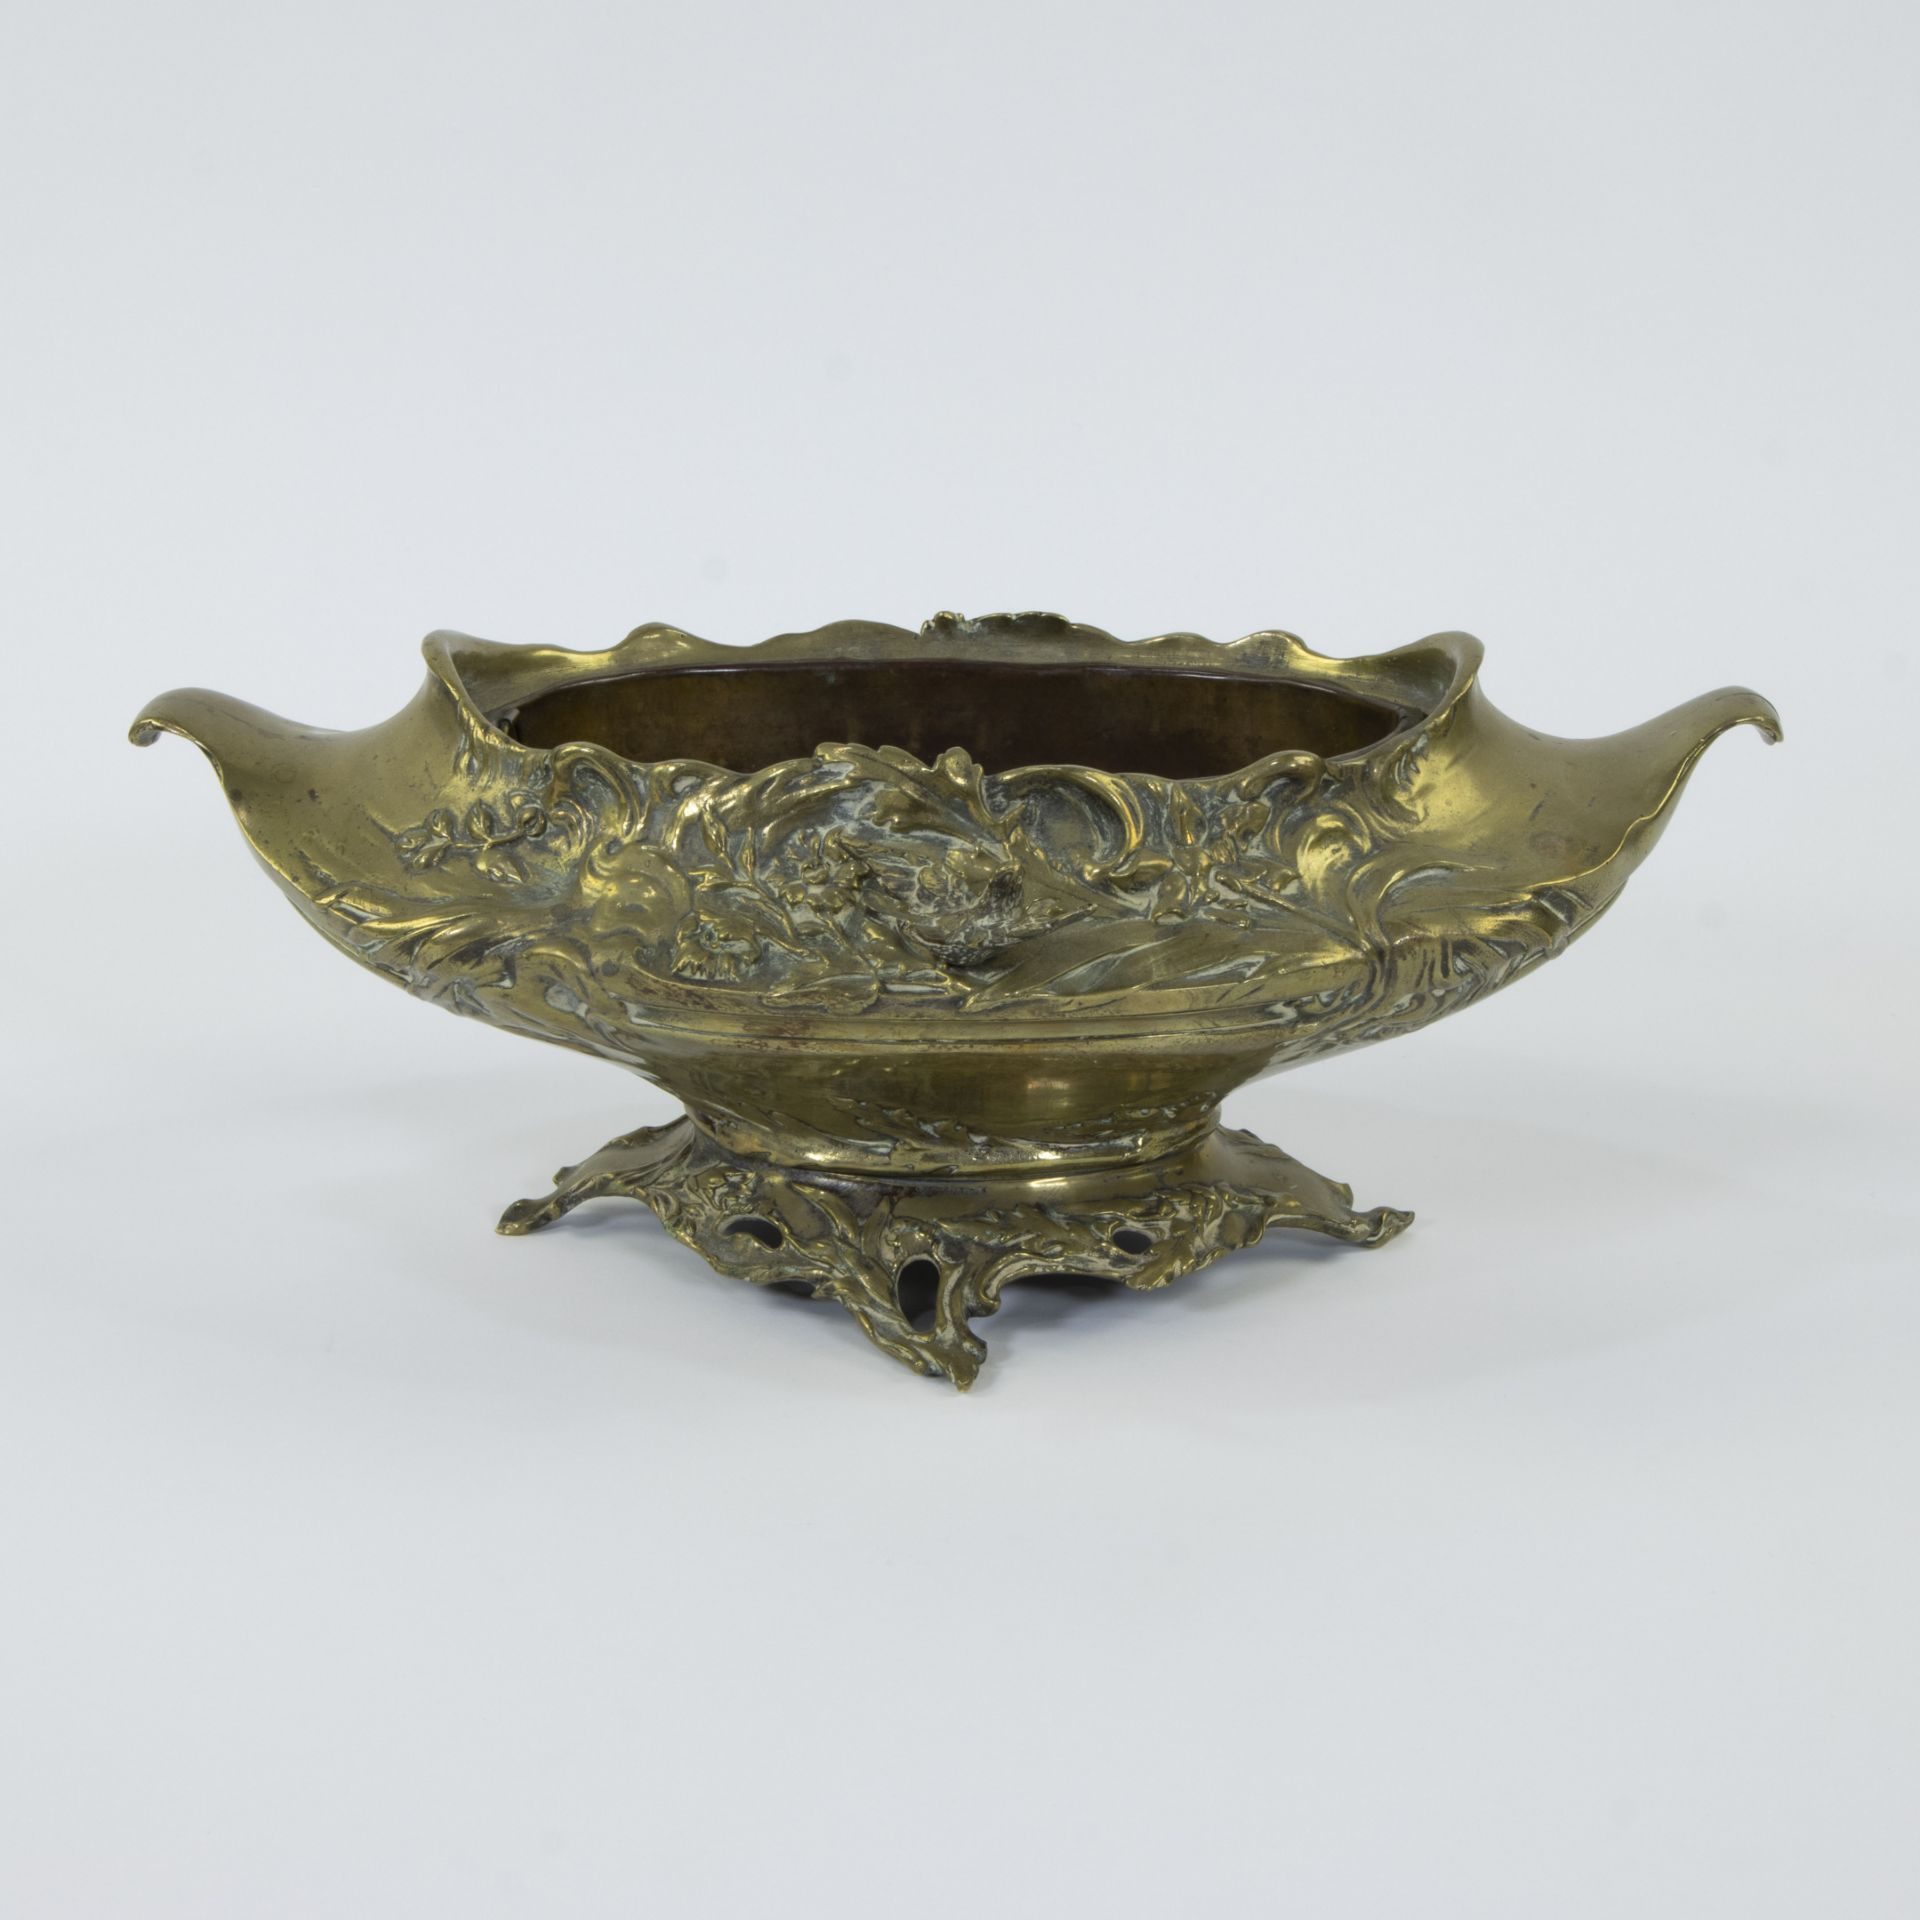 Jardinière in gilt brass decorated with floral motifs and a bird, circa 1920